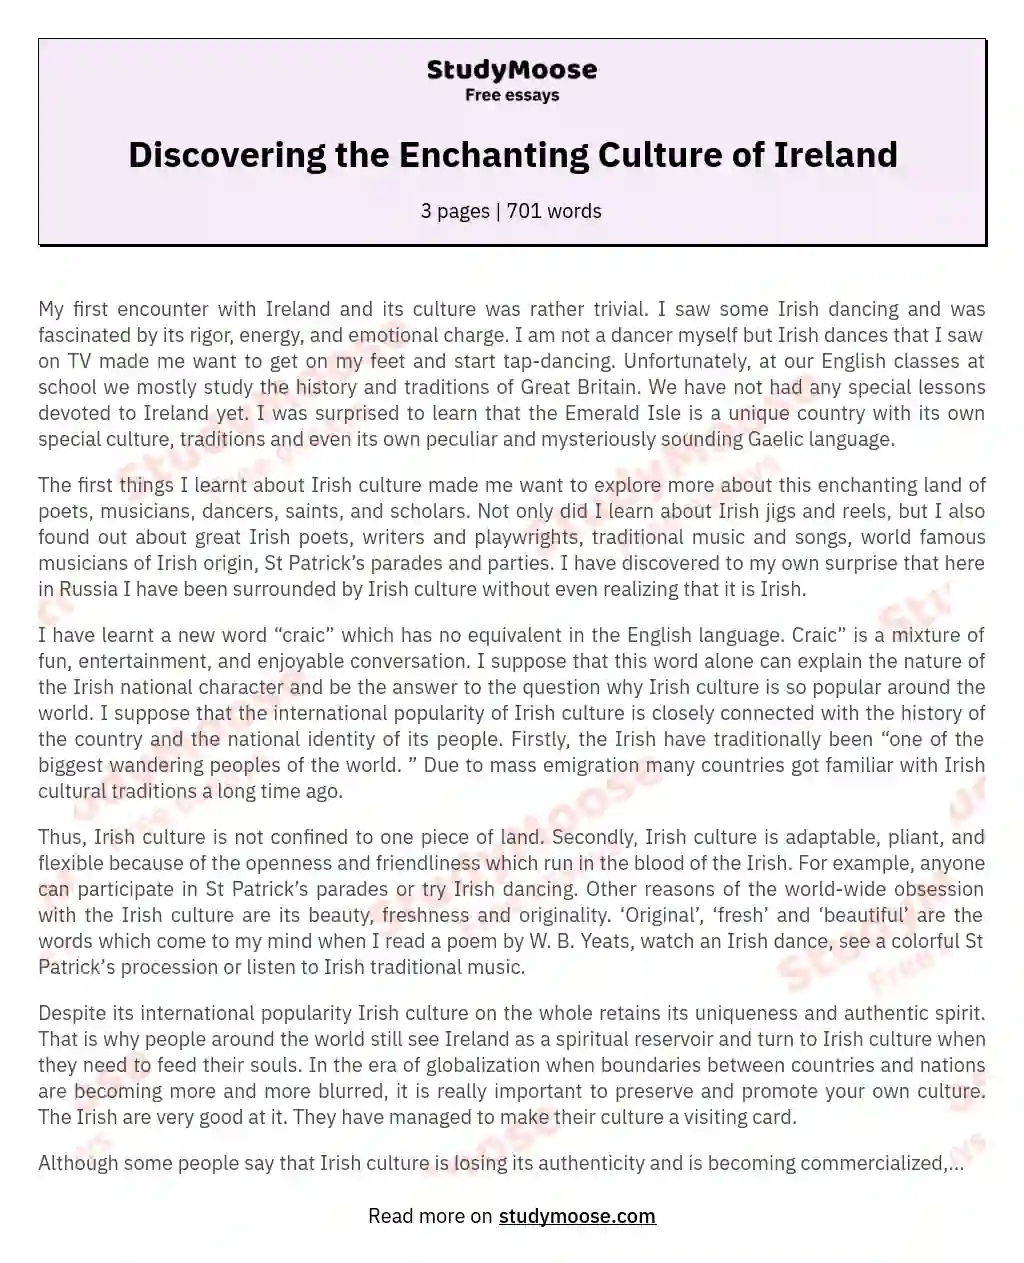 Discovering the Enchanting Culture of Ireland essay